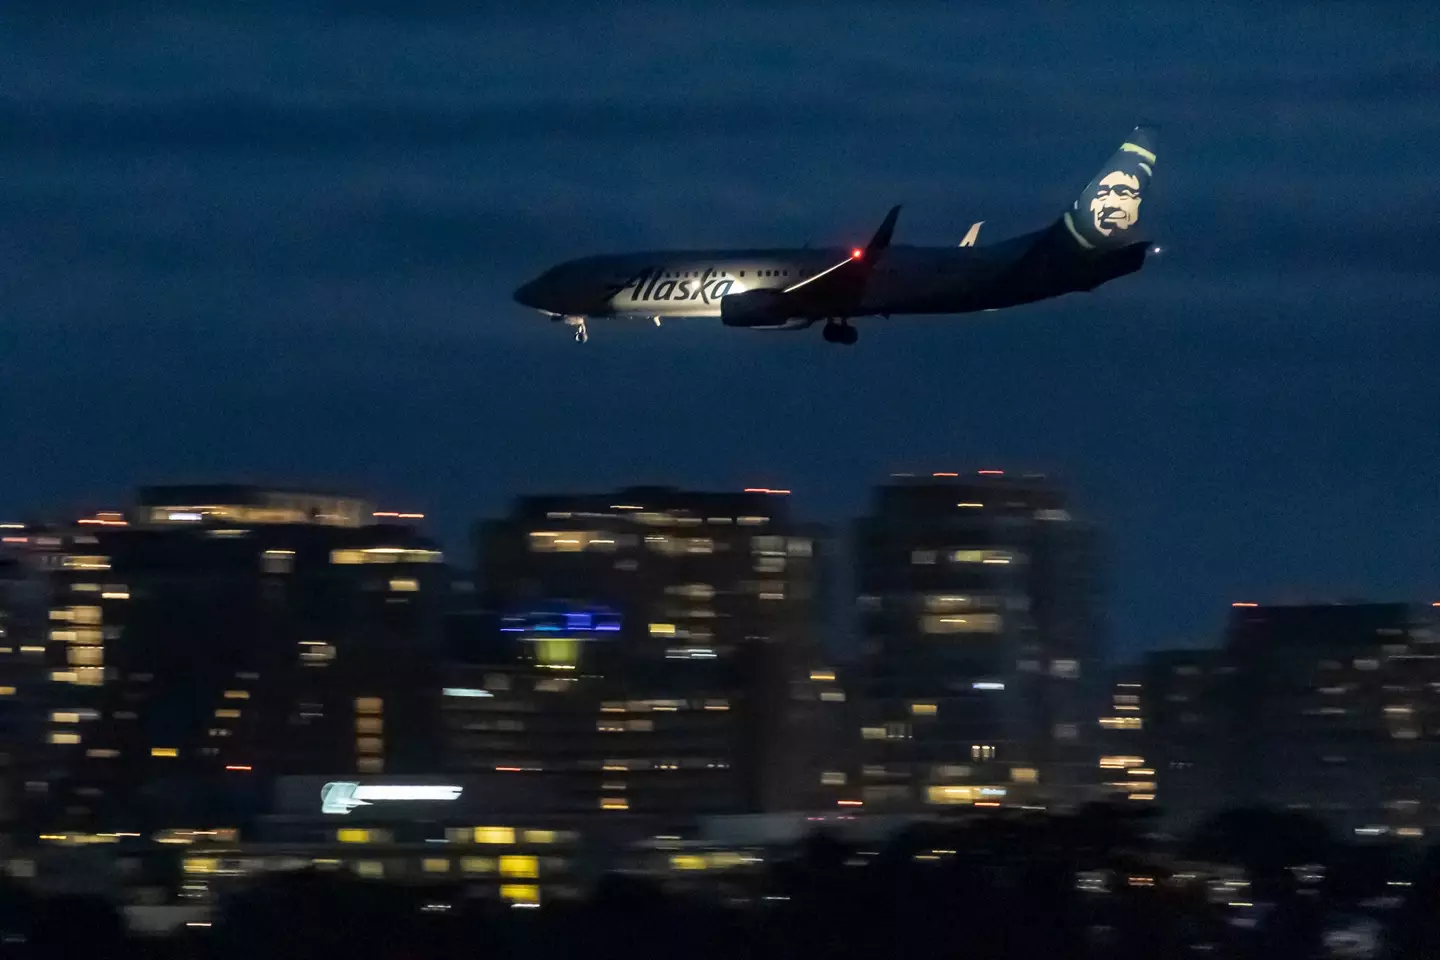 The Alaskan Airlines flight was forced to make an emergency landing.